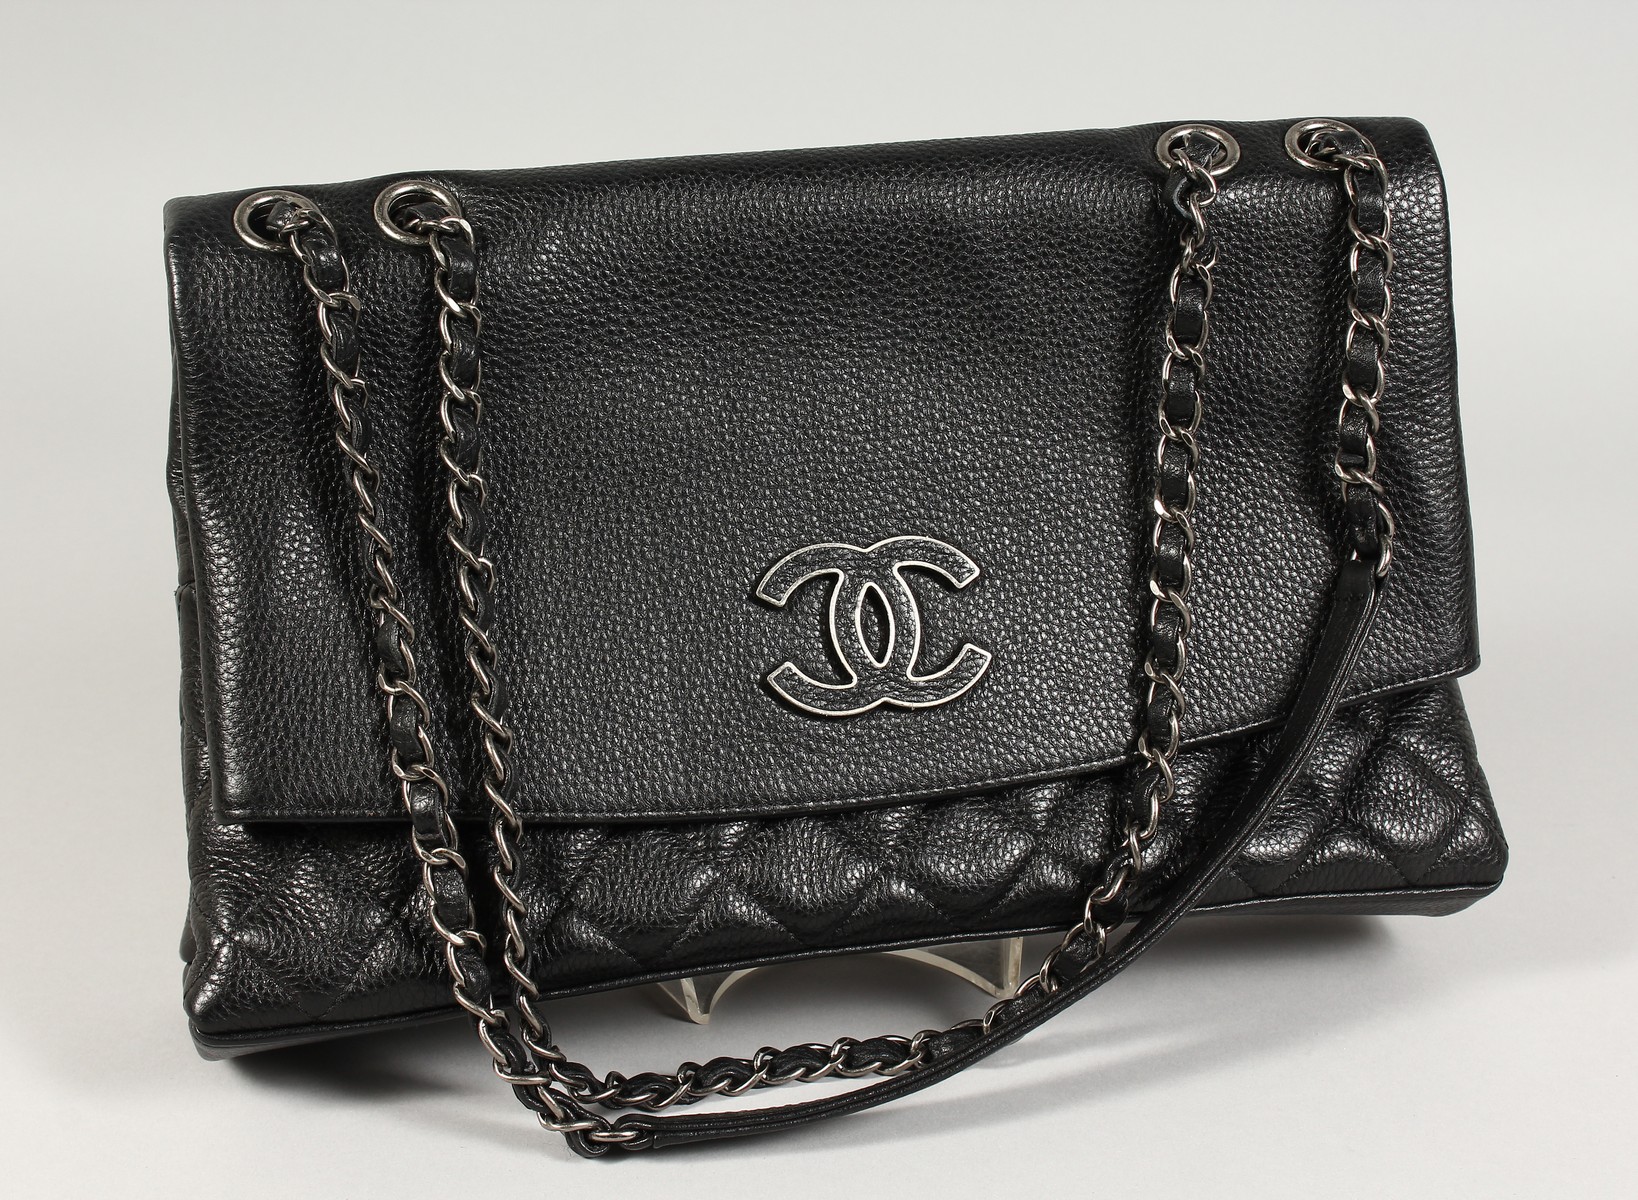 A CHANEL FOLD-UP QUILTED HANDBAG in a Chanel bag.